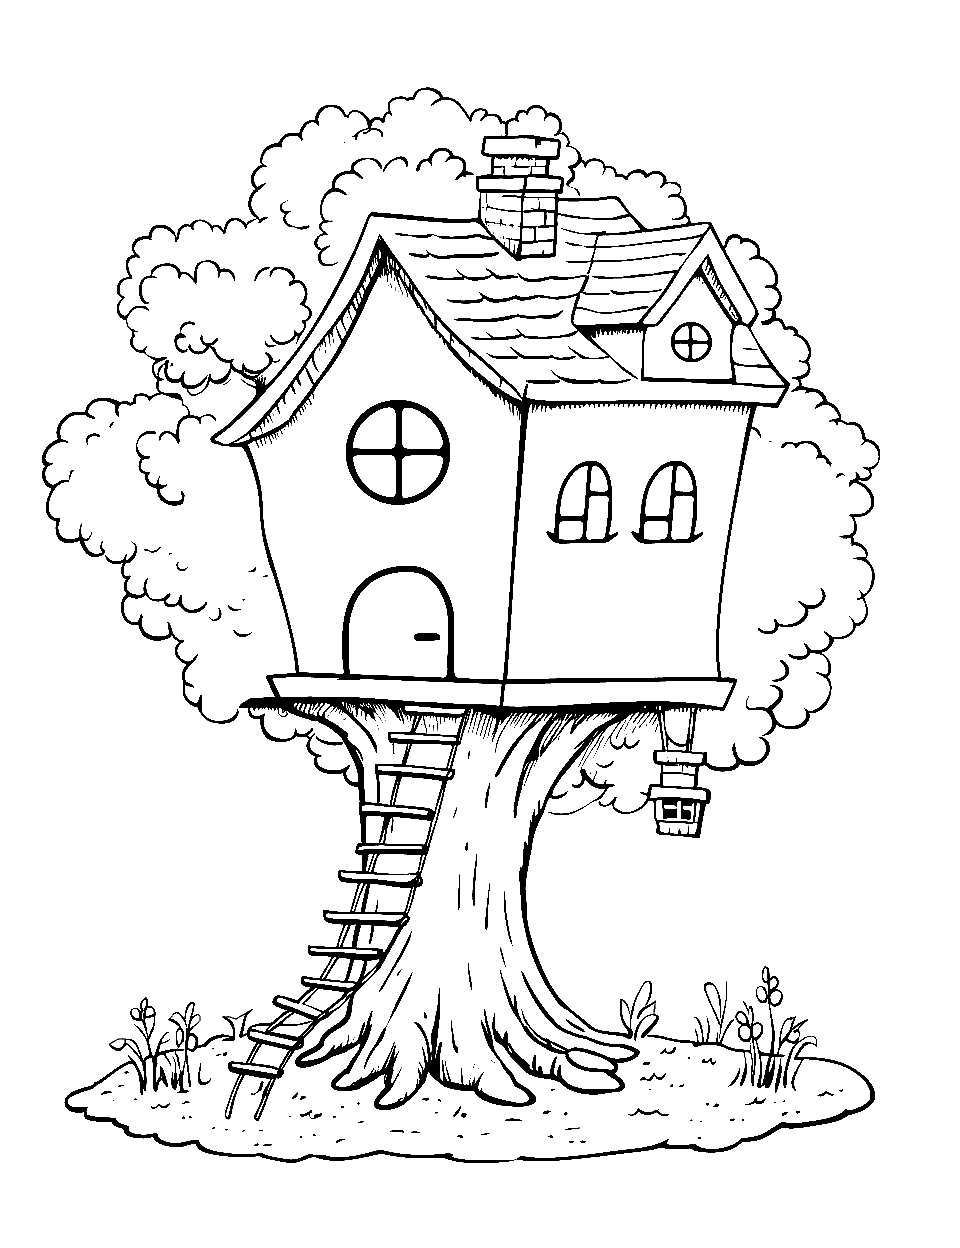 Daring Tree House Coloring Page - A tall descending ladder from a fun tree house.